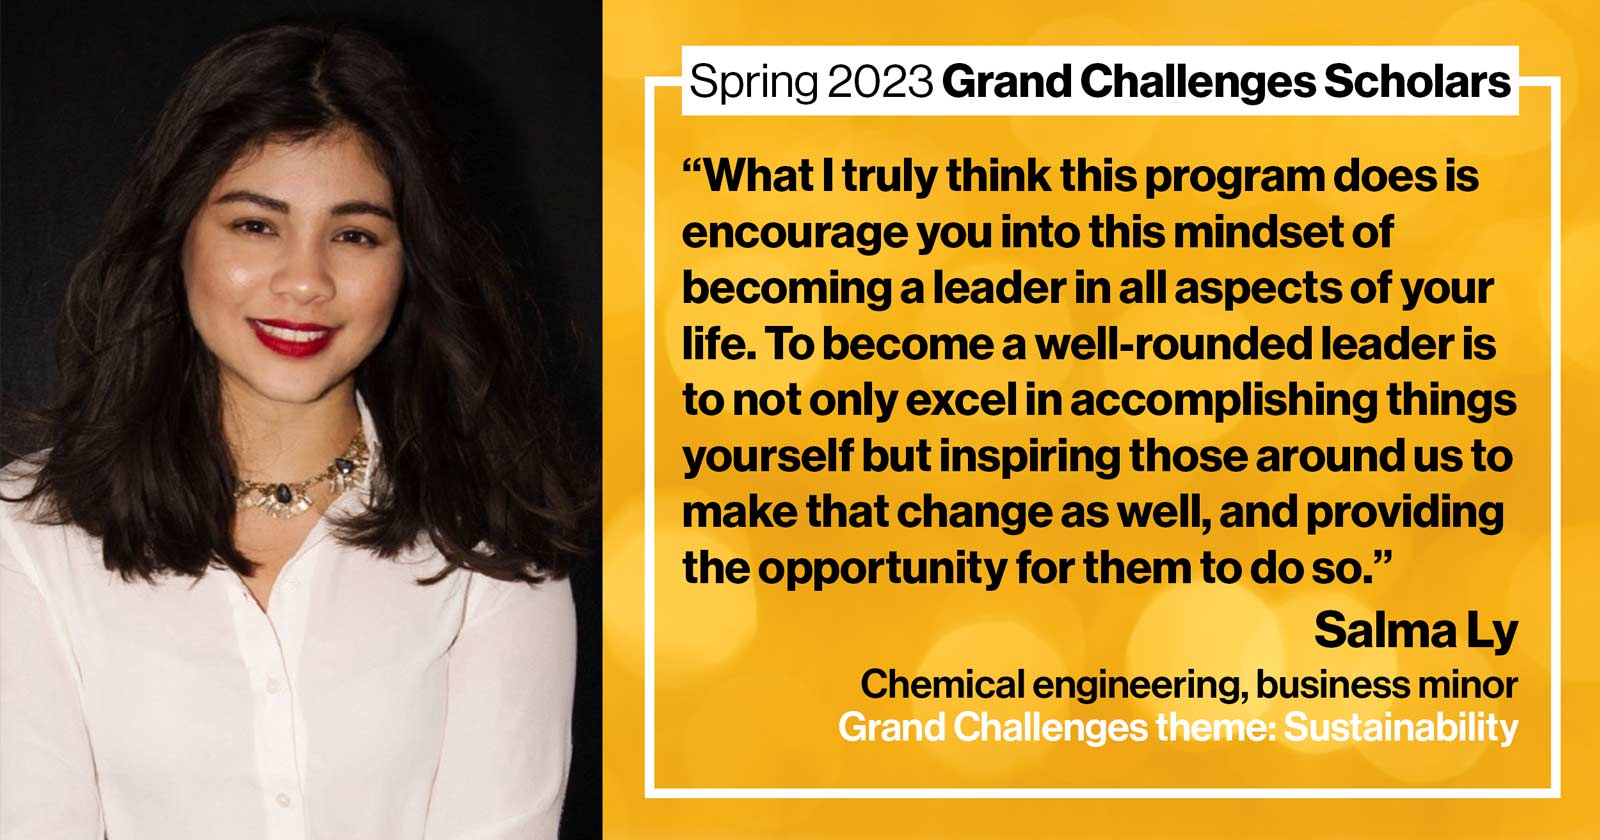 "Salma Ly Chemical engineering, business minor Grand Challenge: Sustainability Quote: “What I truly think this program does is encourage you into this mindset of becoming a leader in all aspects of your life. To become a well-rounded leader is to not only excel in accomplishing things yourself but inspiring those around to make that change as well, providing the opportunity for them to do so.”"